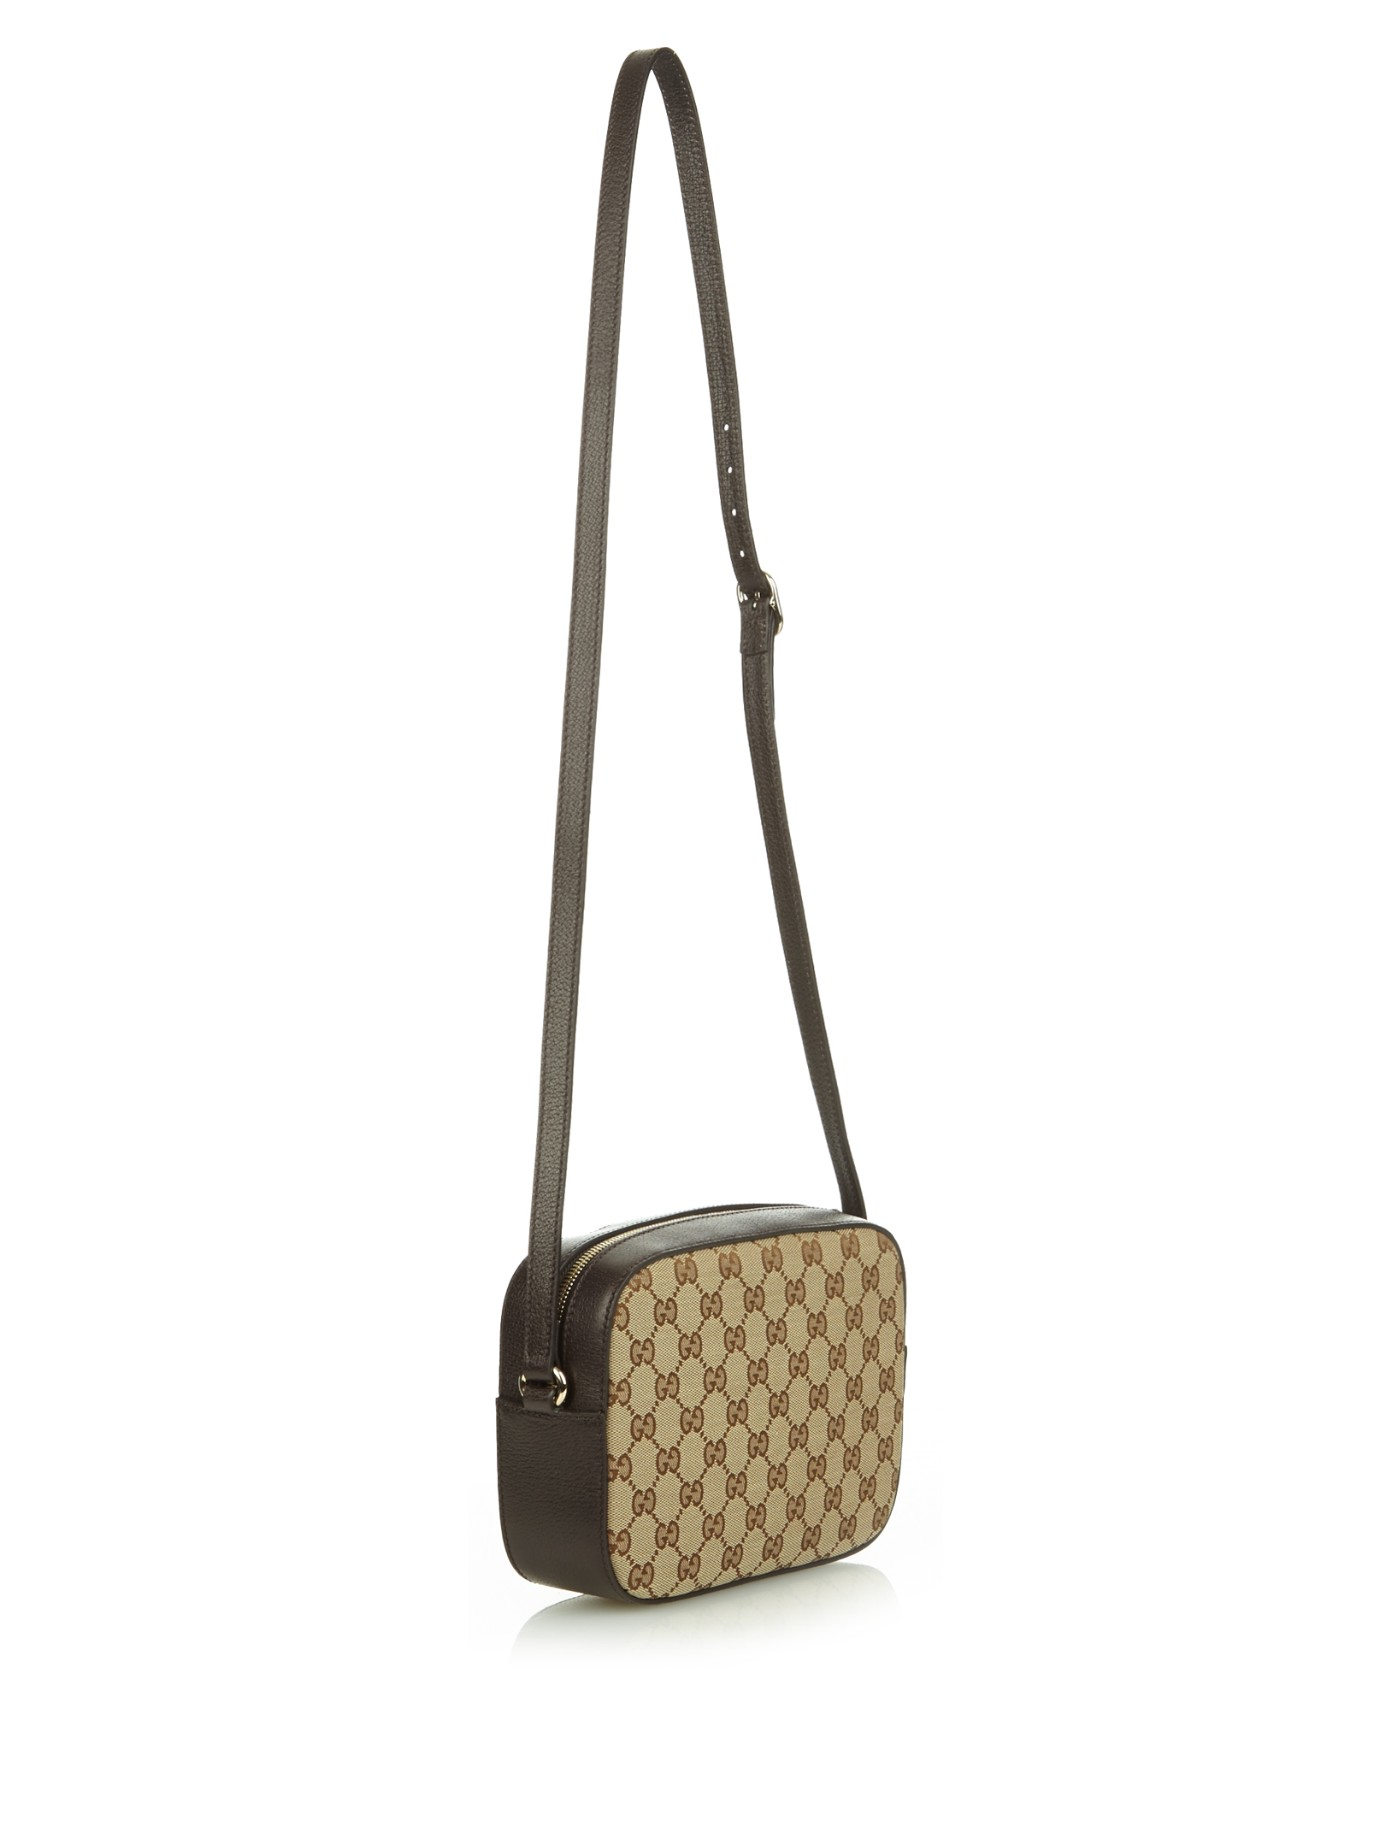 Gucci Line Gg Canvas And Leather Cross-body Bag in Brown | Lyst